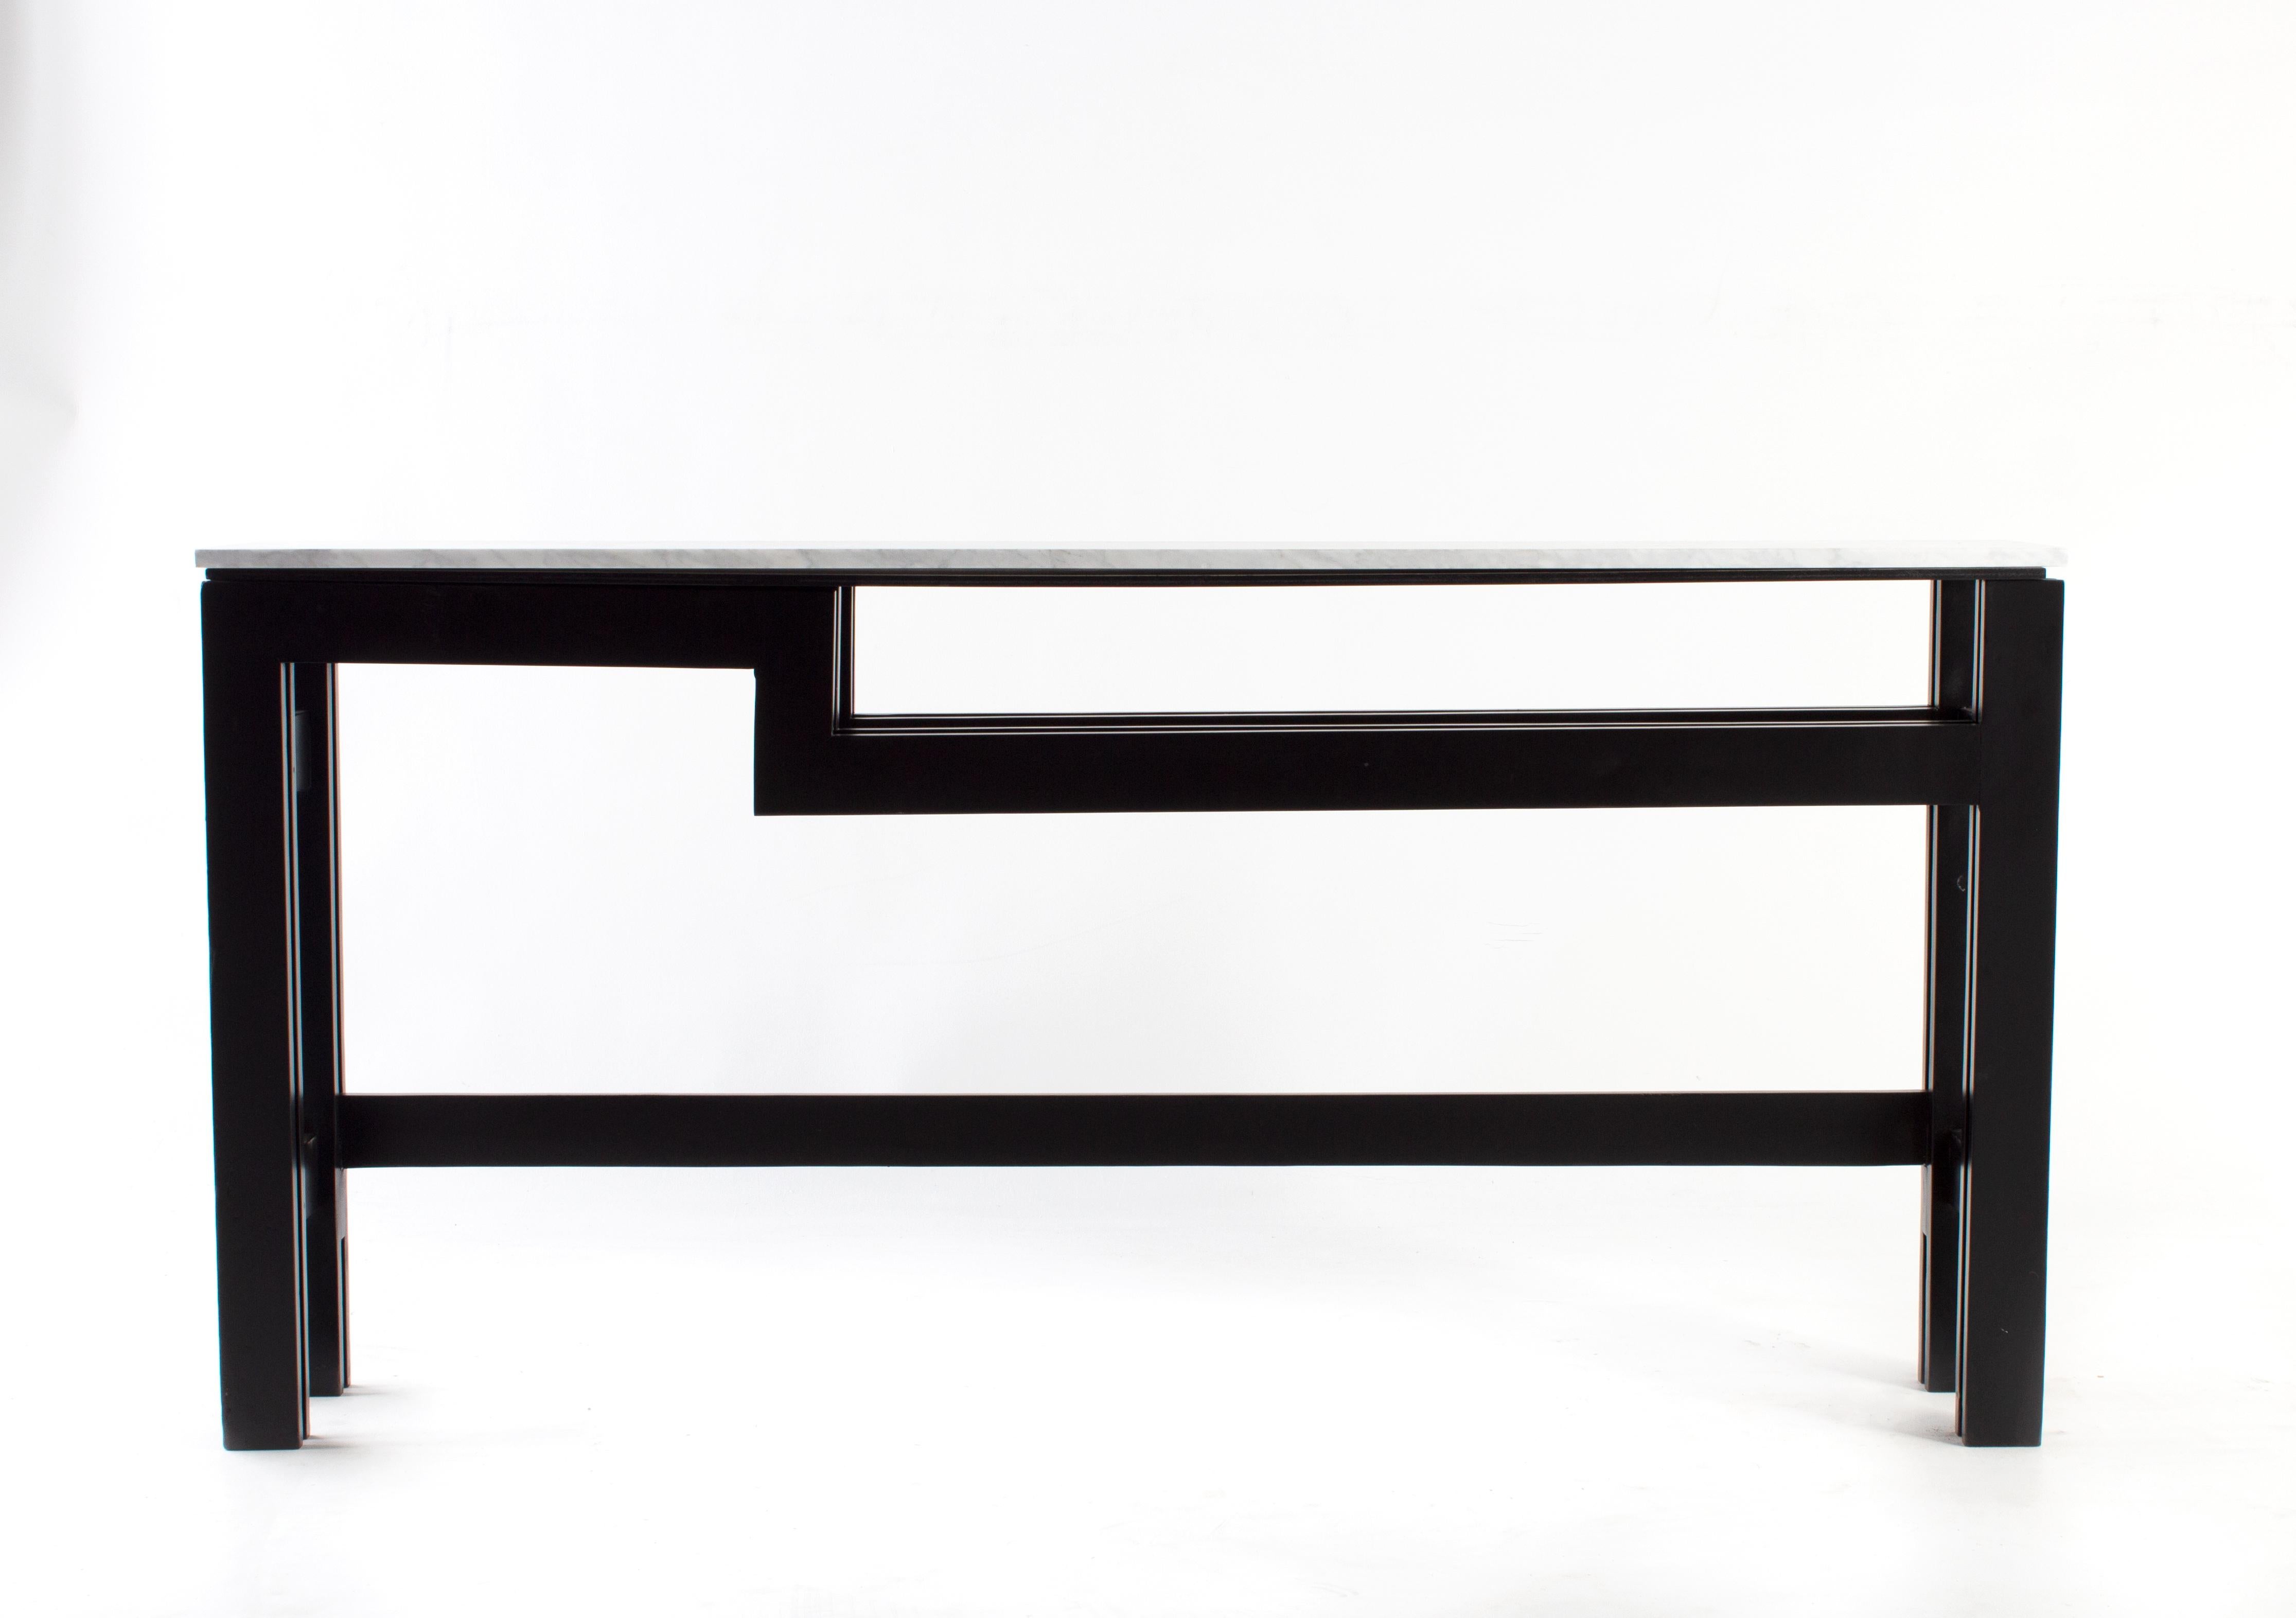 Vintage Italian modernist black wood console table with leathered Carrara marble top. In my organic, contemporary, vintage and mid-century modern aesthetic.

This piece is a part of Brendan Bass’s one-of-a-kind collection, Le Monde. French for “The